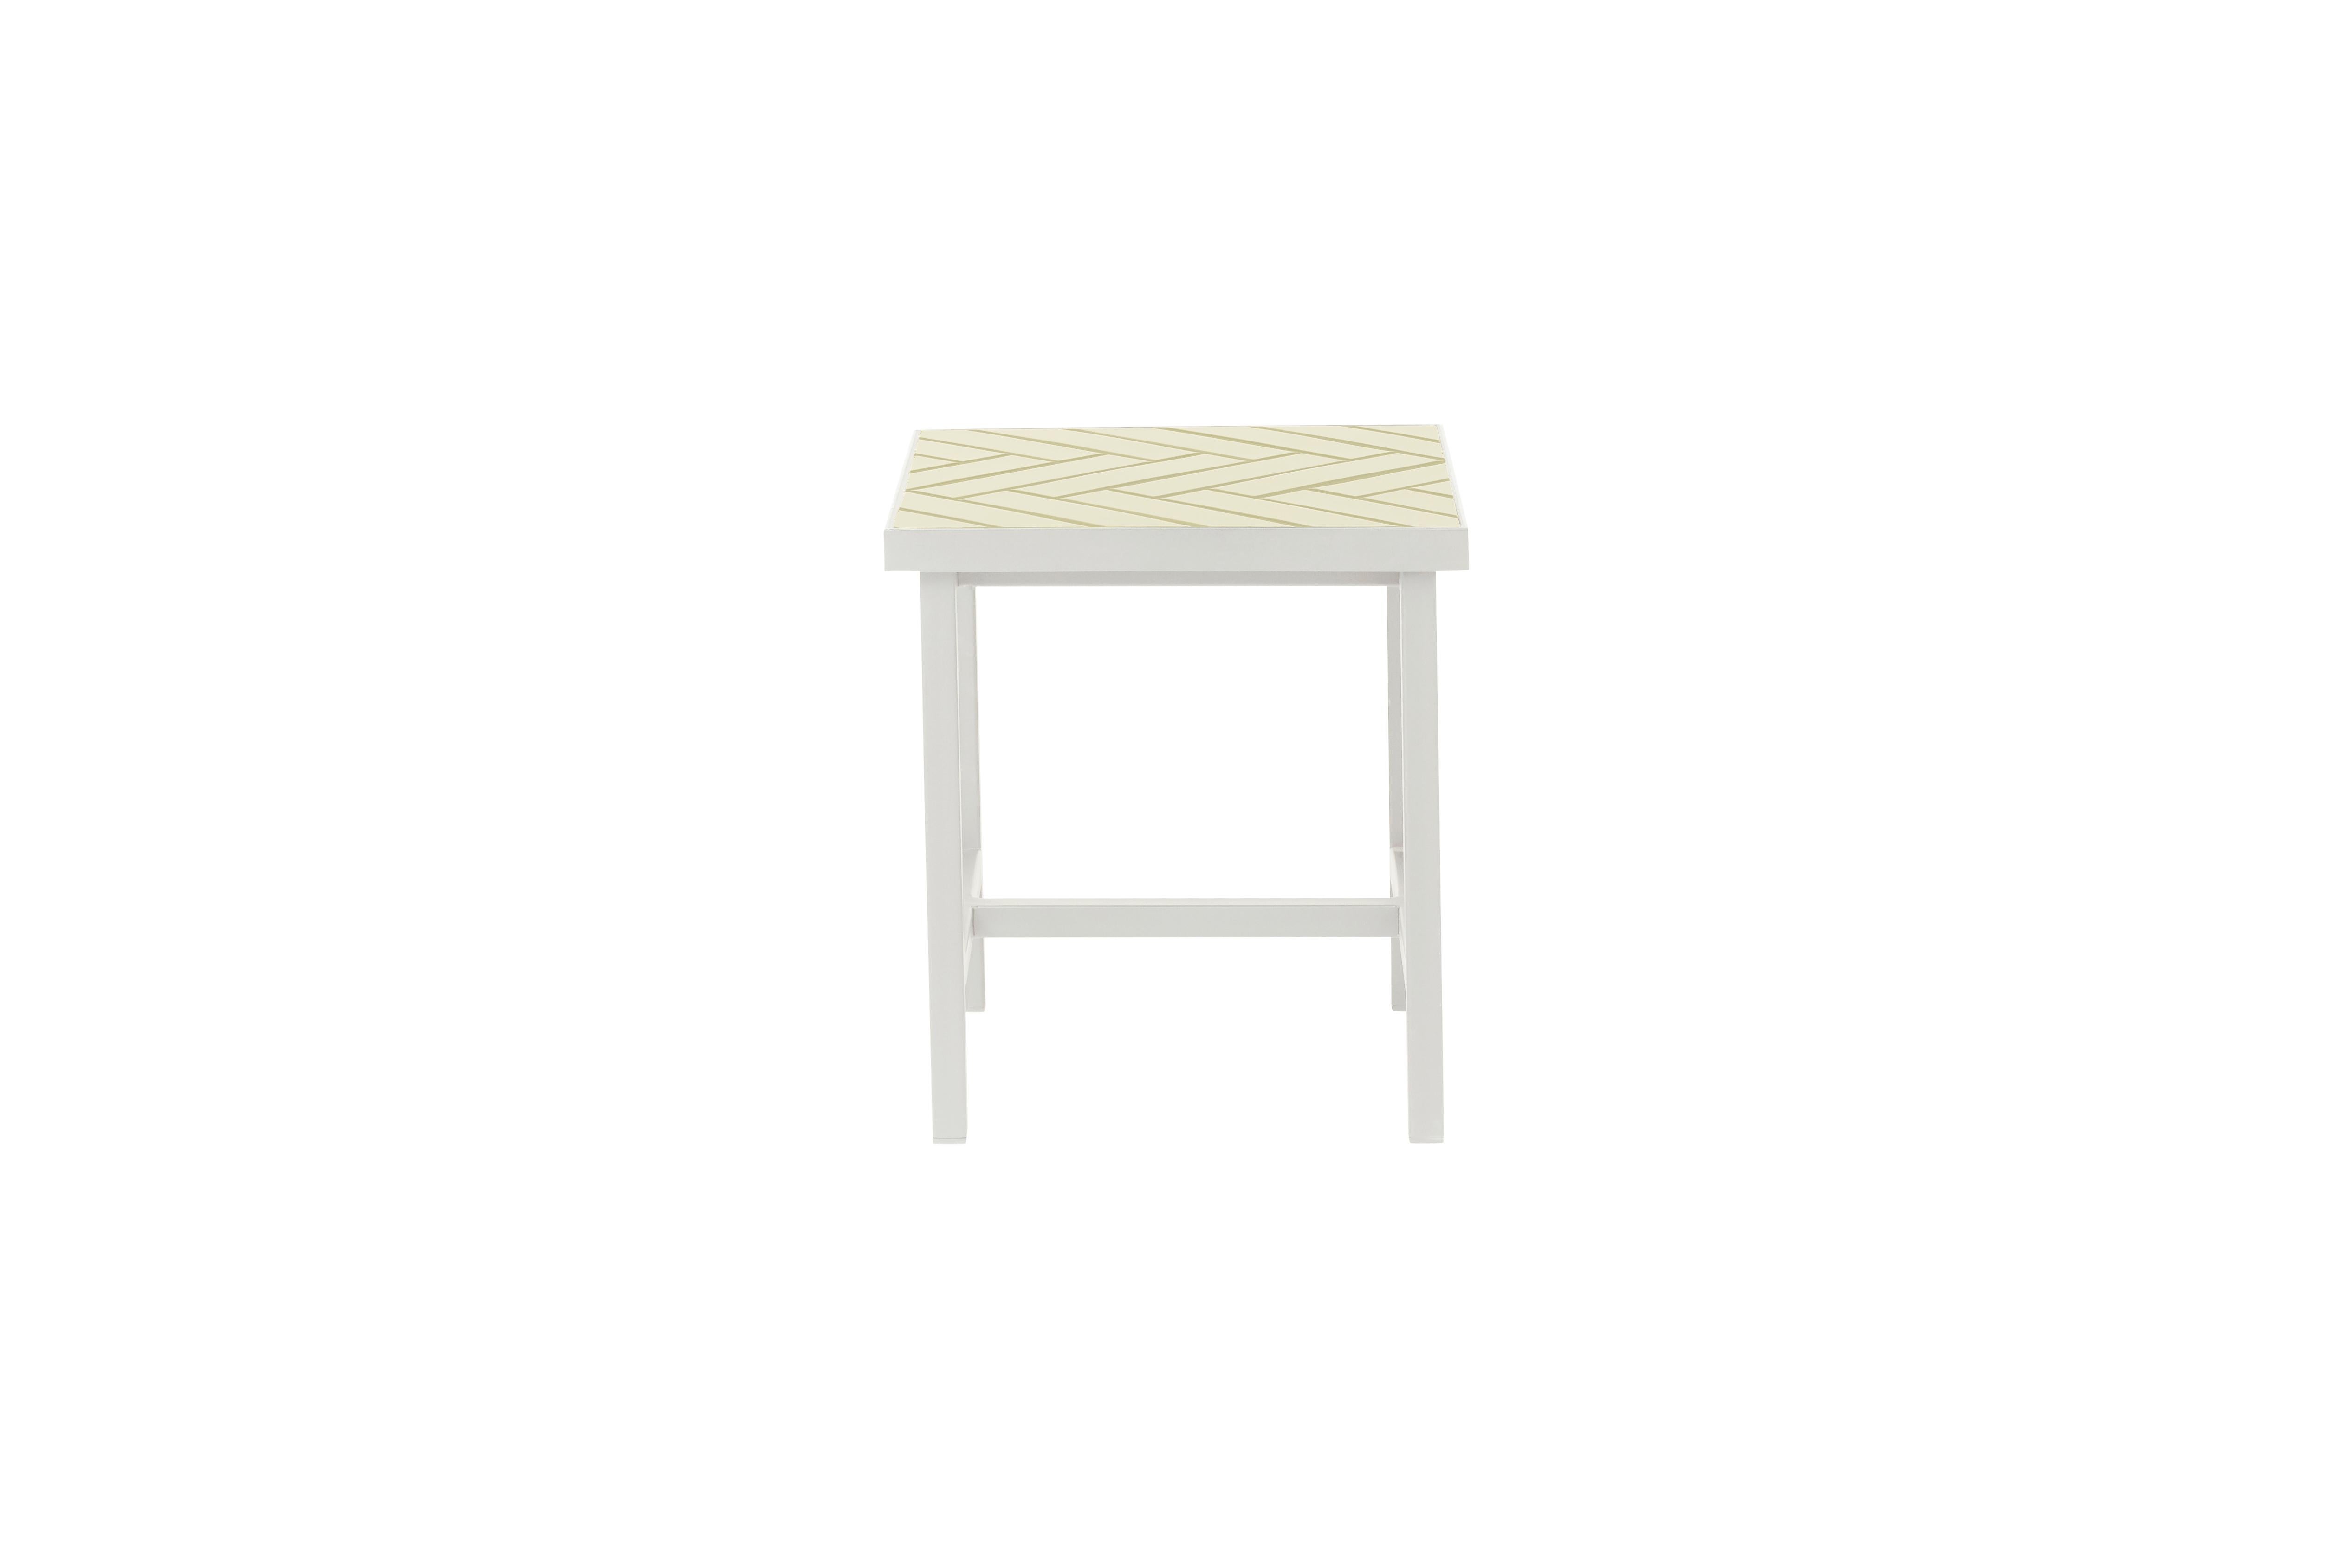 For Sale: Yellow (Butter yellow) Herringbone Side Table, by Charlotte Høncke from Warm Nordic 2